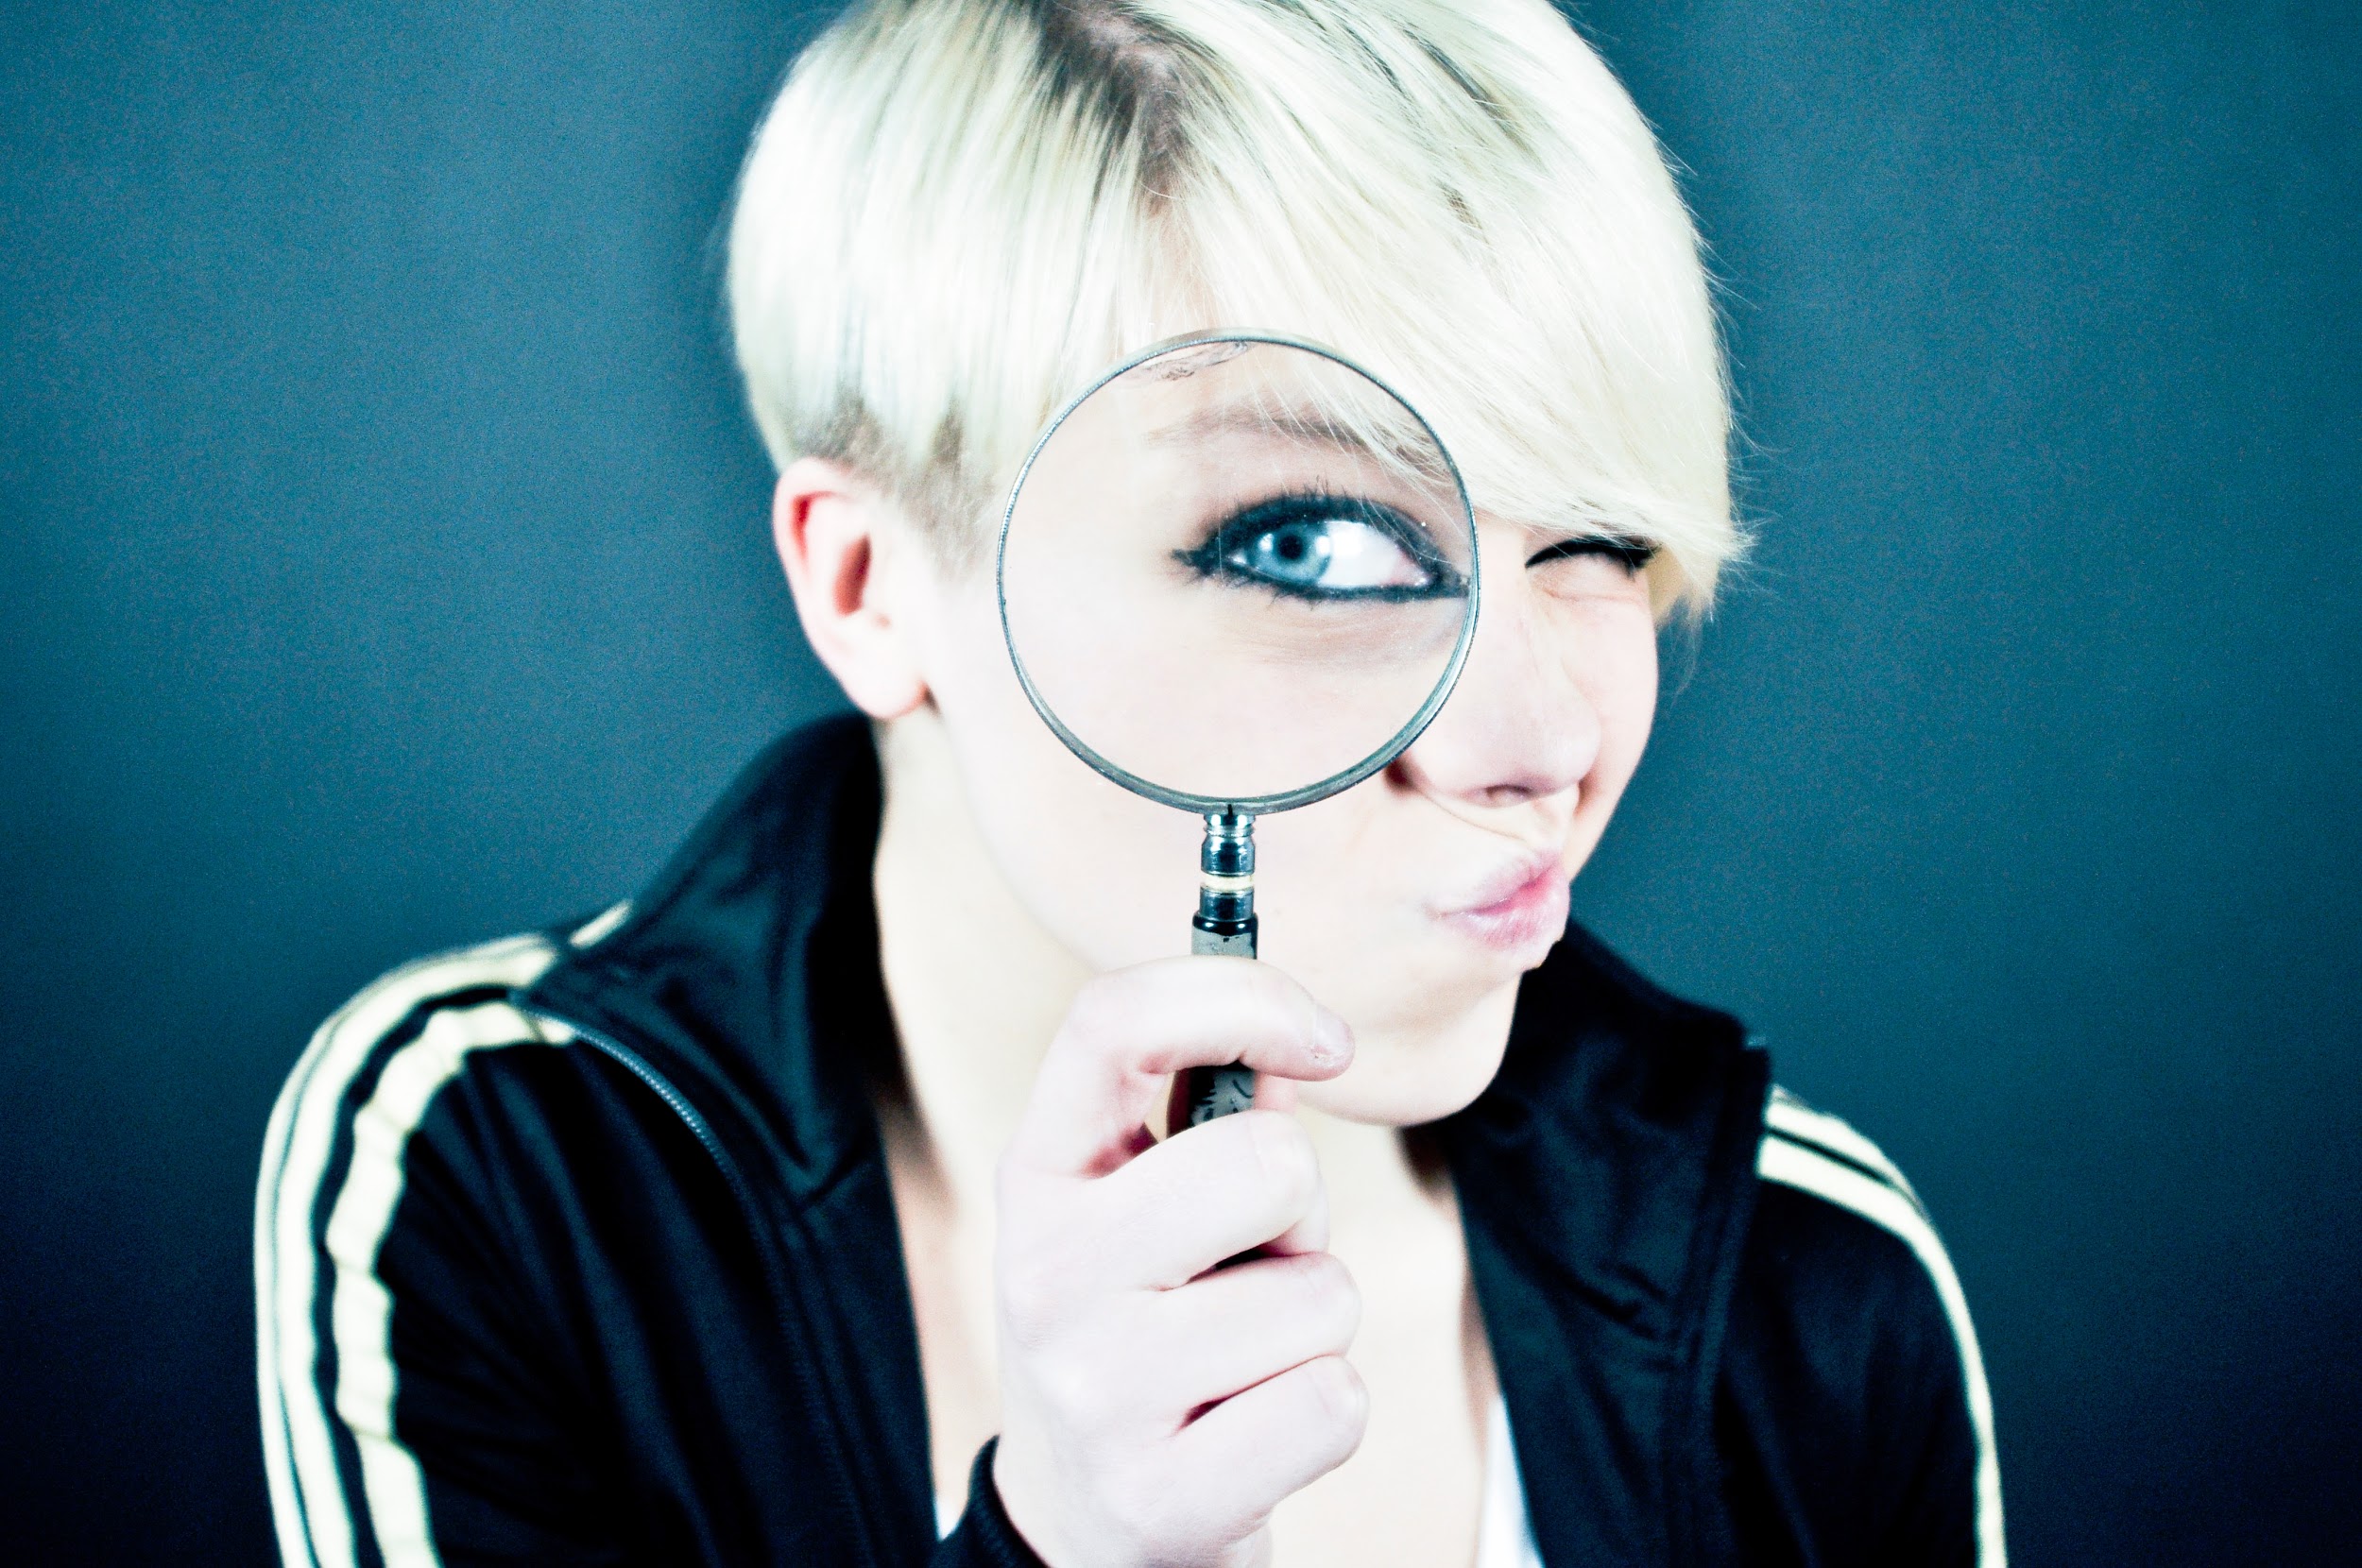 A young woman with short dyed blonde hair and wearing a black and white track jacket peers through a magnifying glass. Through the glass, we can see her blue eye, its edges heavily darkened with eye liner.